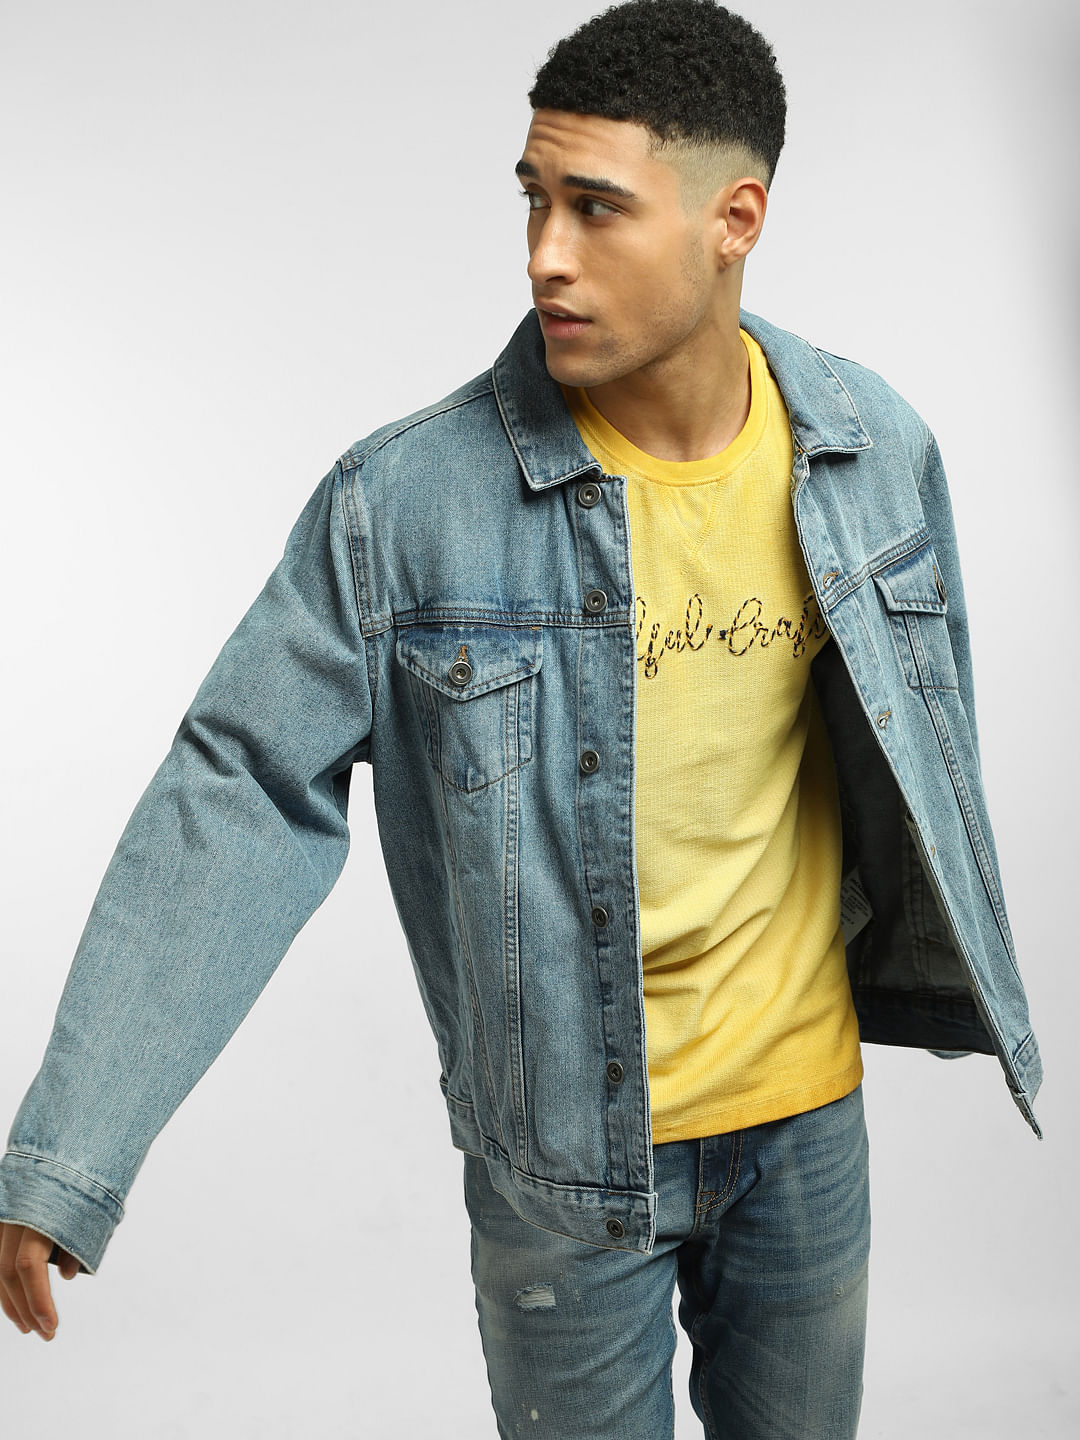 Handsome Hipster White Shirt Yellow Background Buttoning His Denim Jacket  Stock Photo by ©pavelborn 364473546